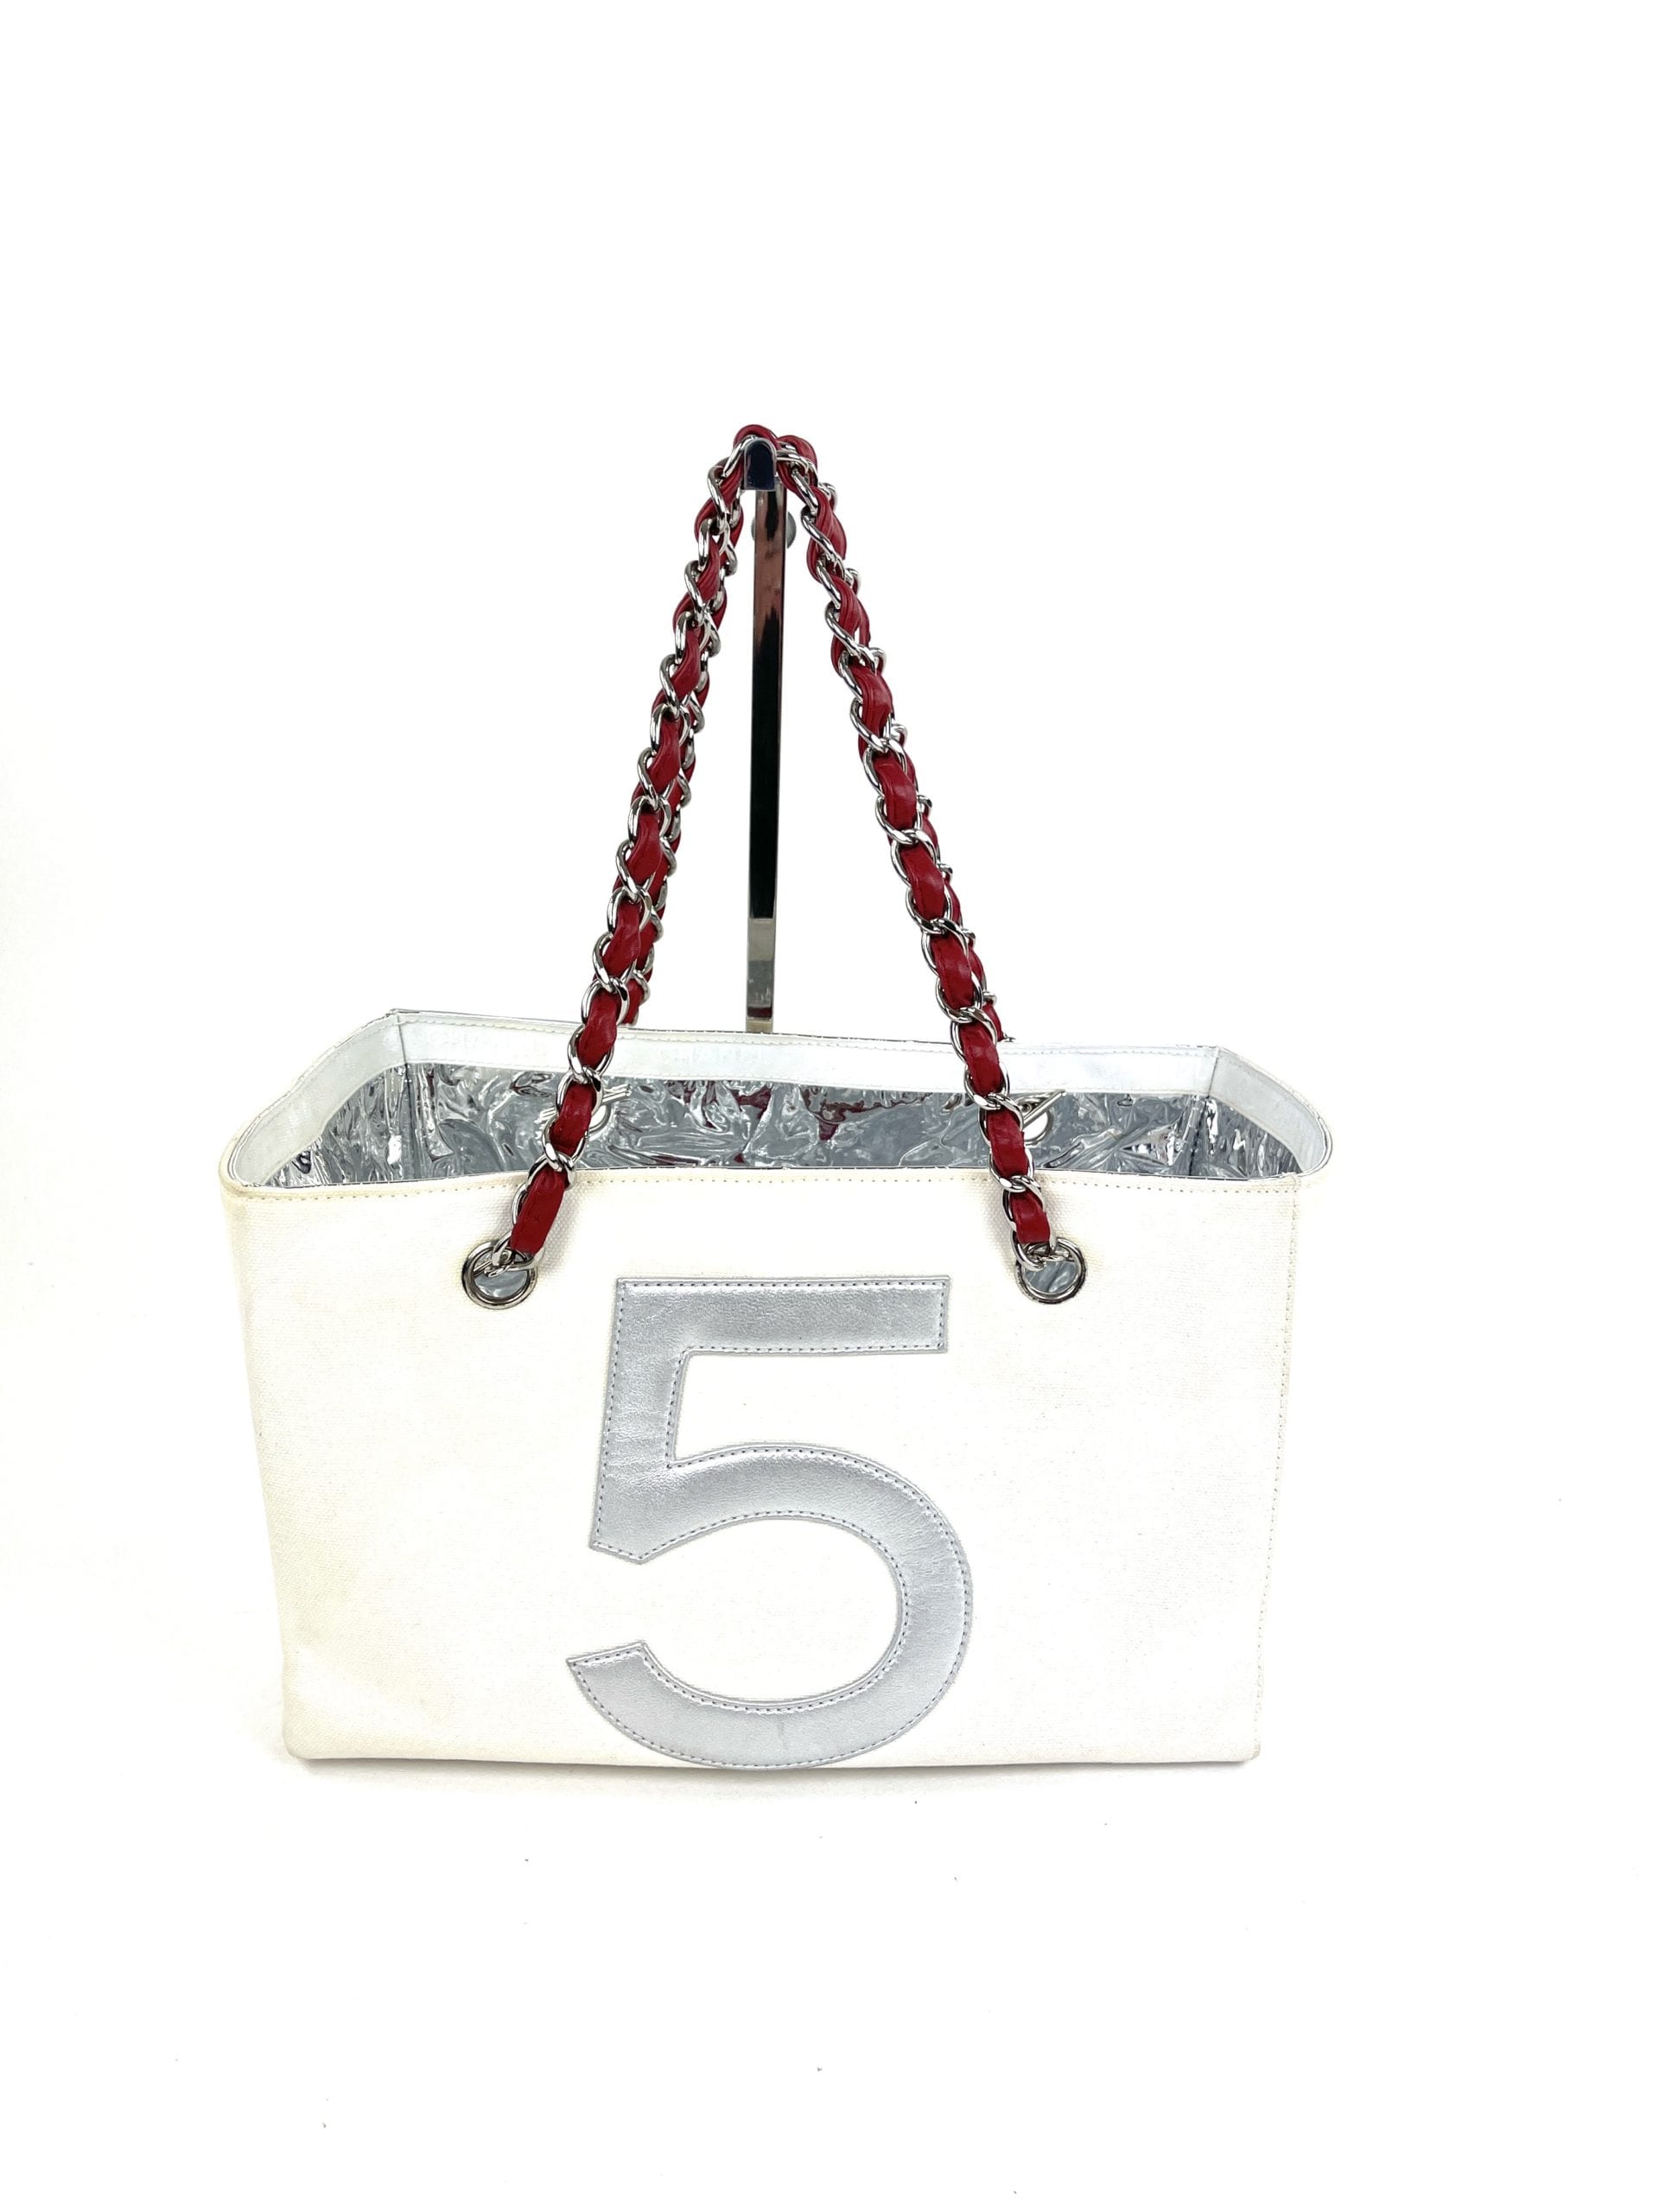 Chanel tote bag No.5 chocolate bar chain canvas leather white